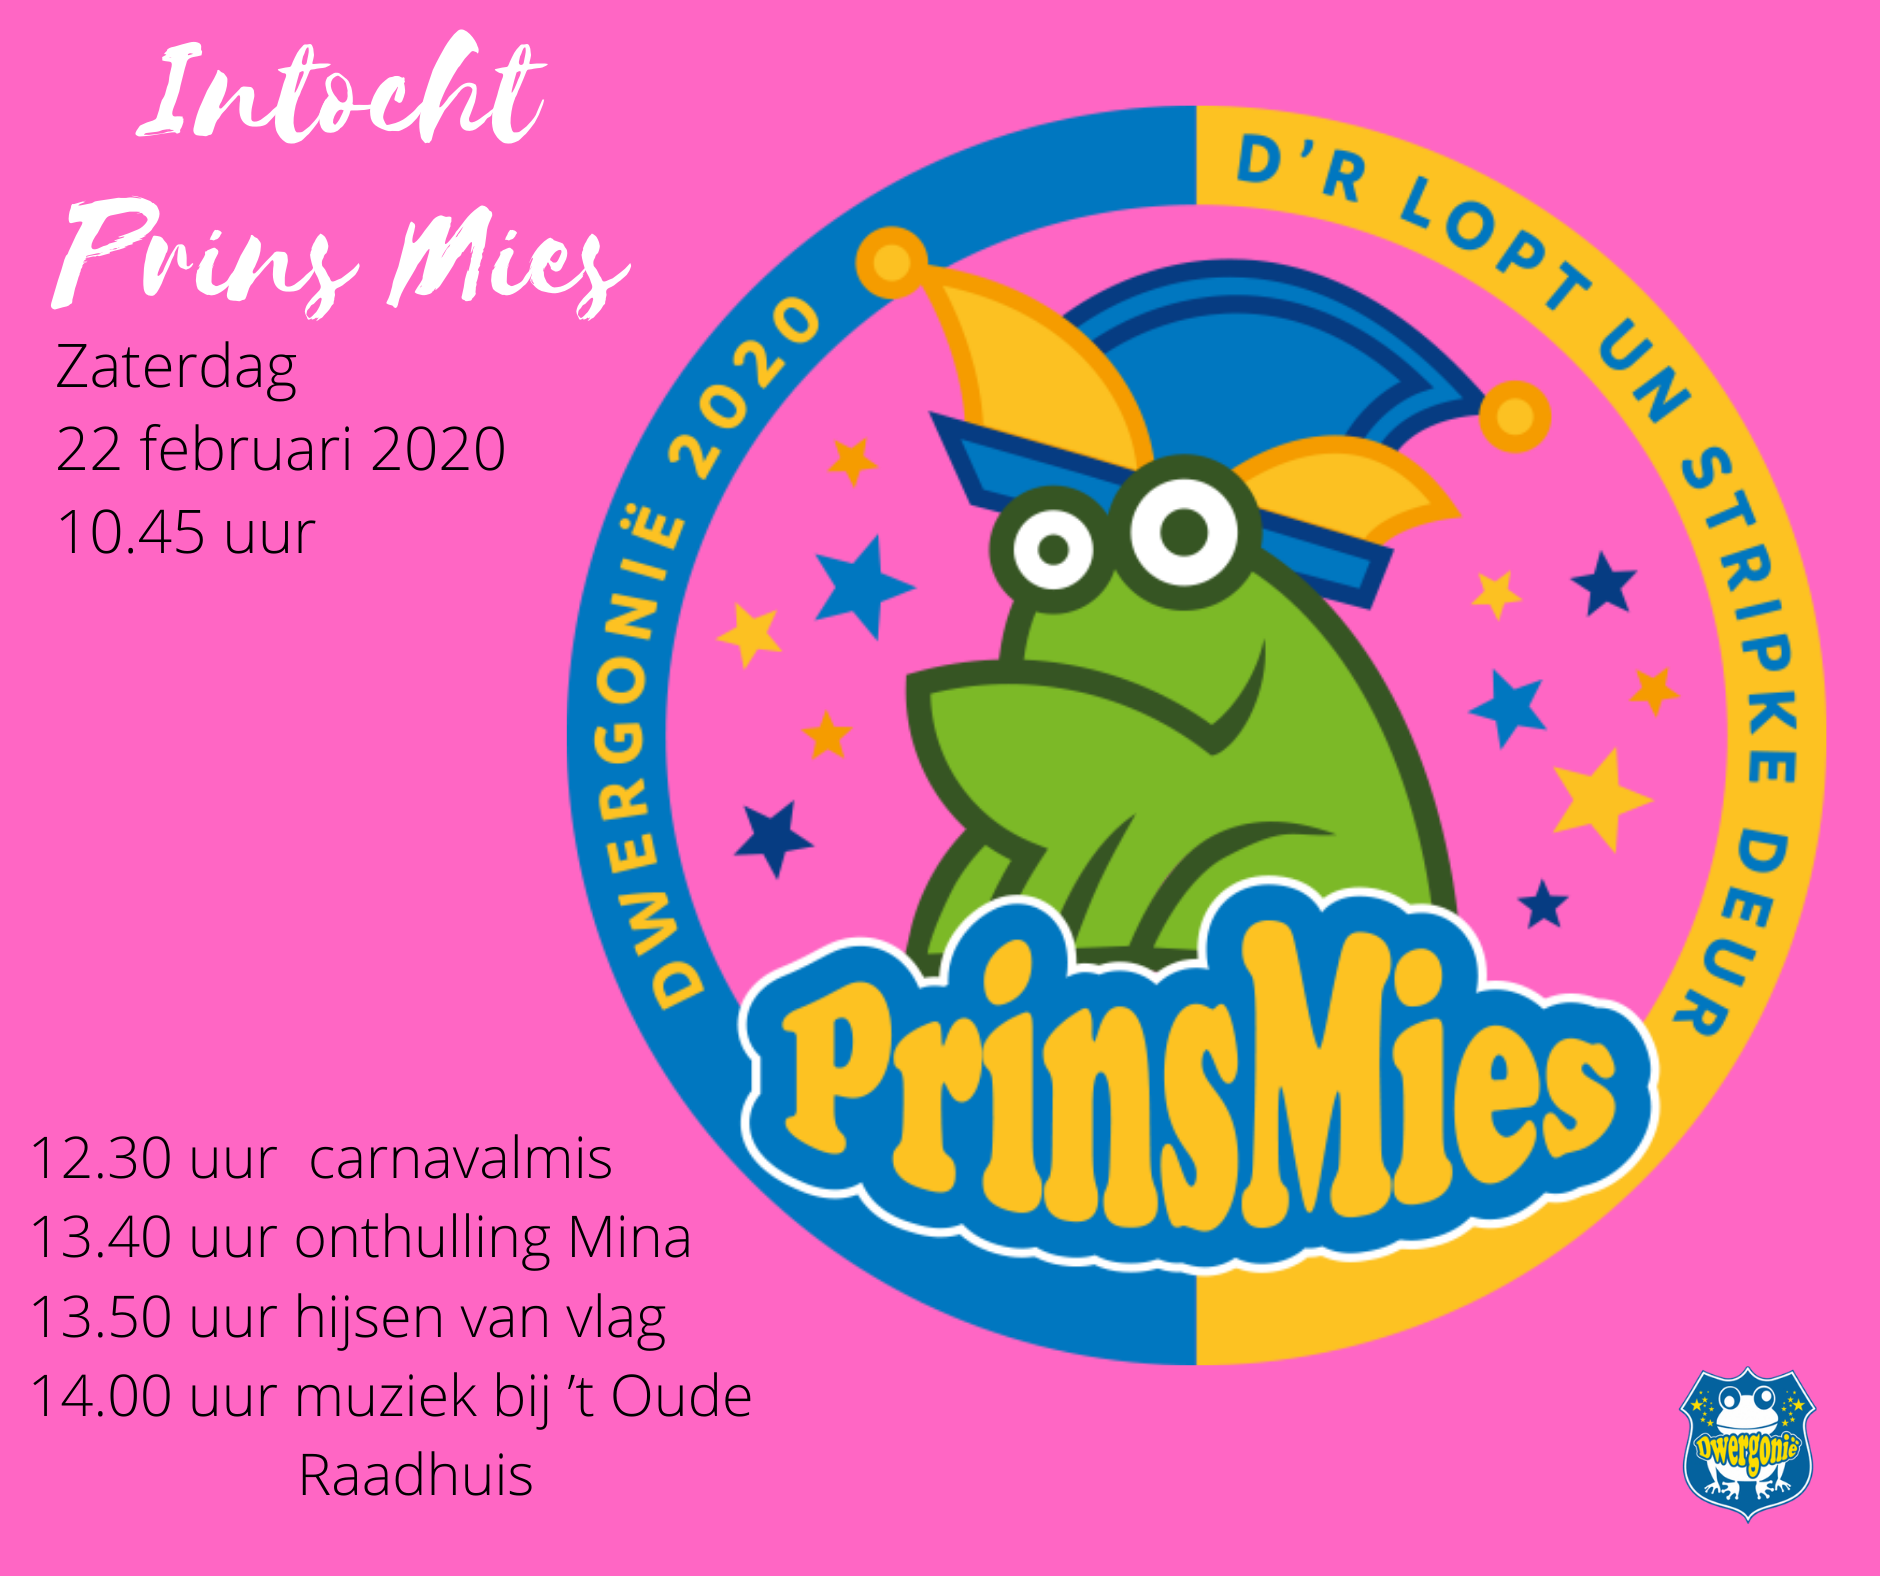 Intocht Prins Mies